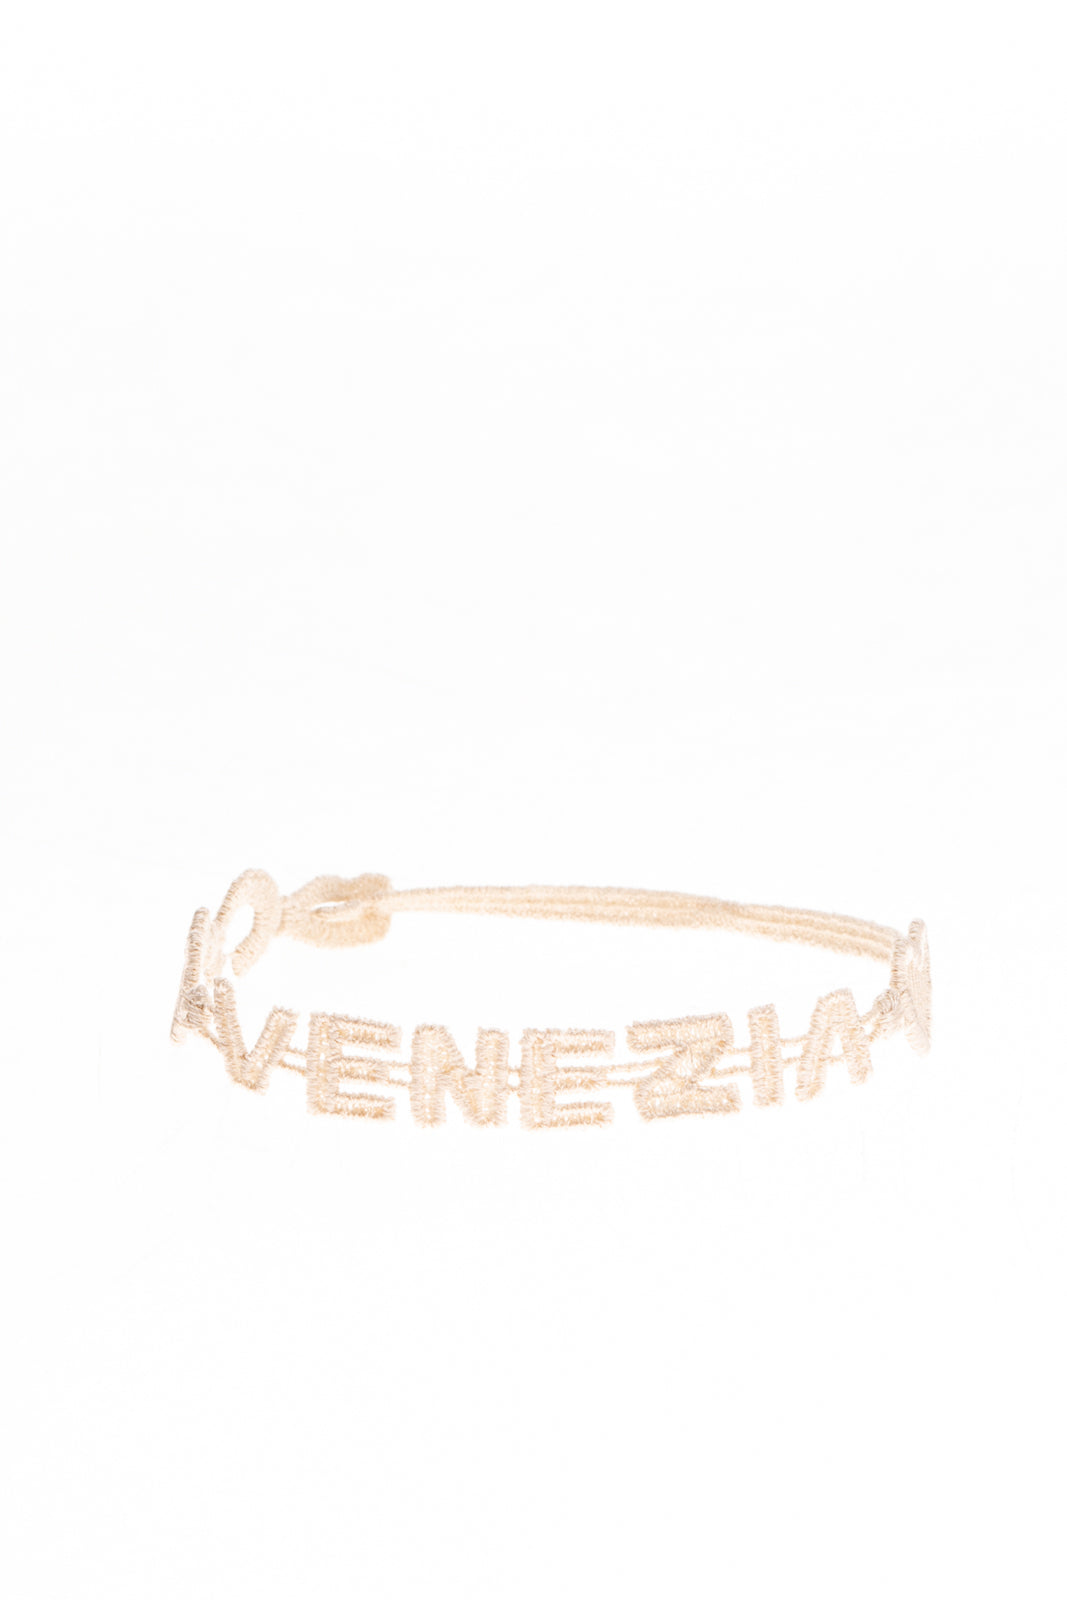 CRUCIANI Slide Bracelet Embroidered 'LOVE VENEZIA' Made in Italy gallery main photo